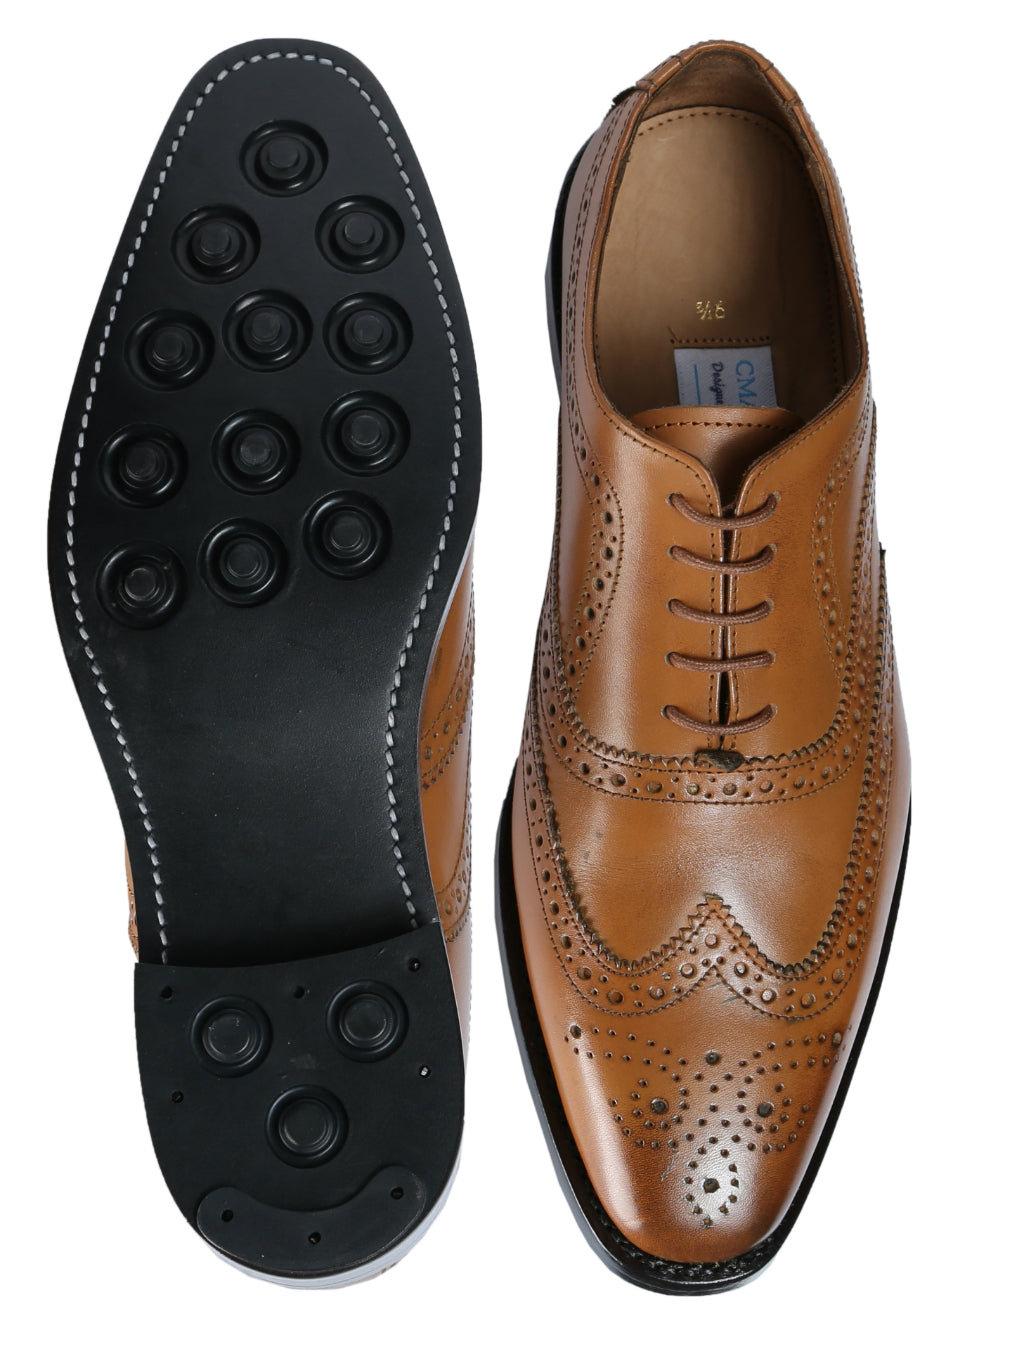 leather wingtips